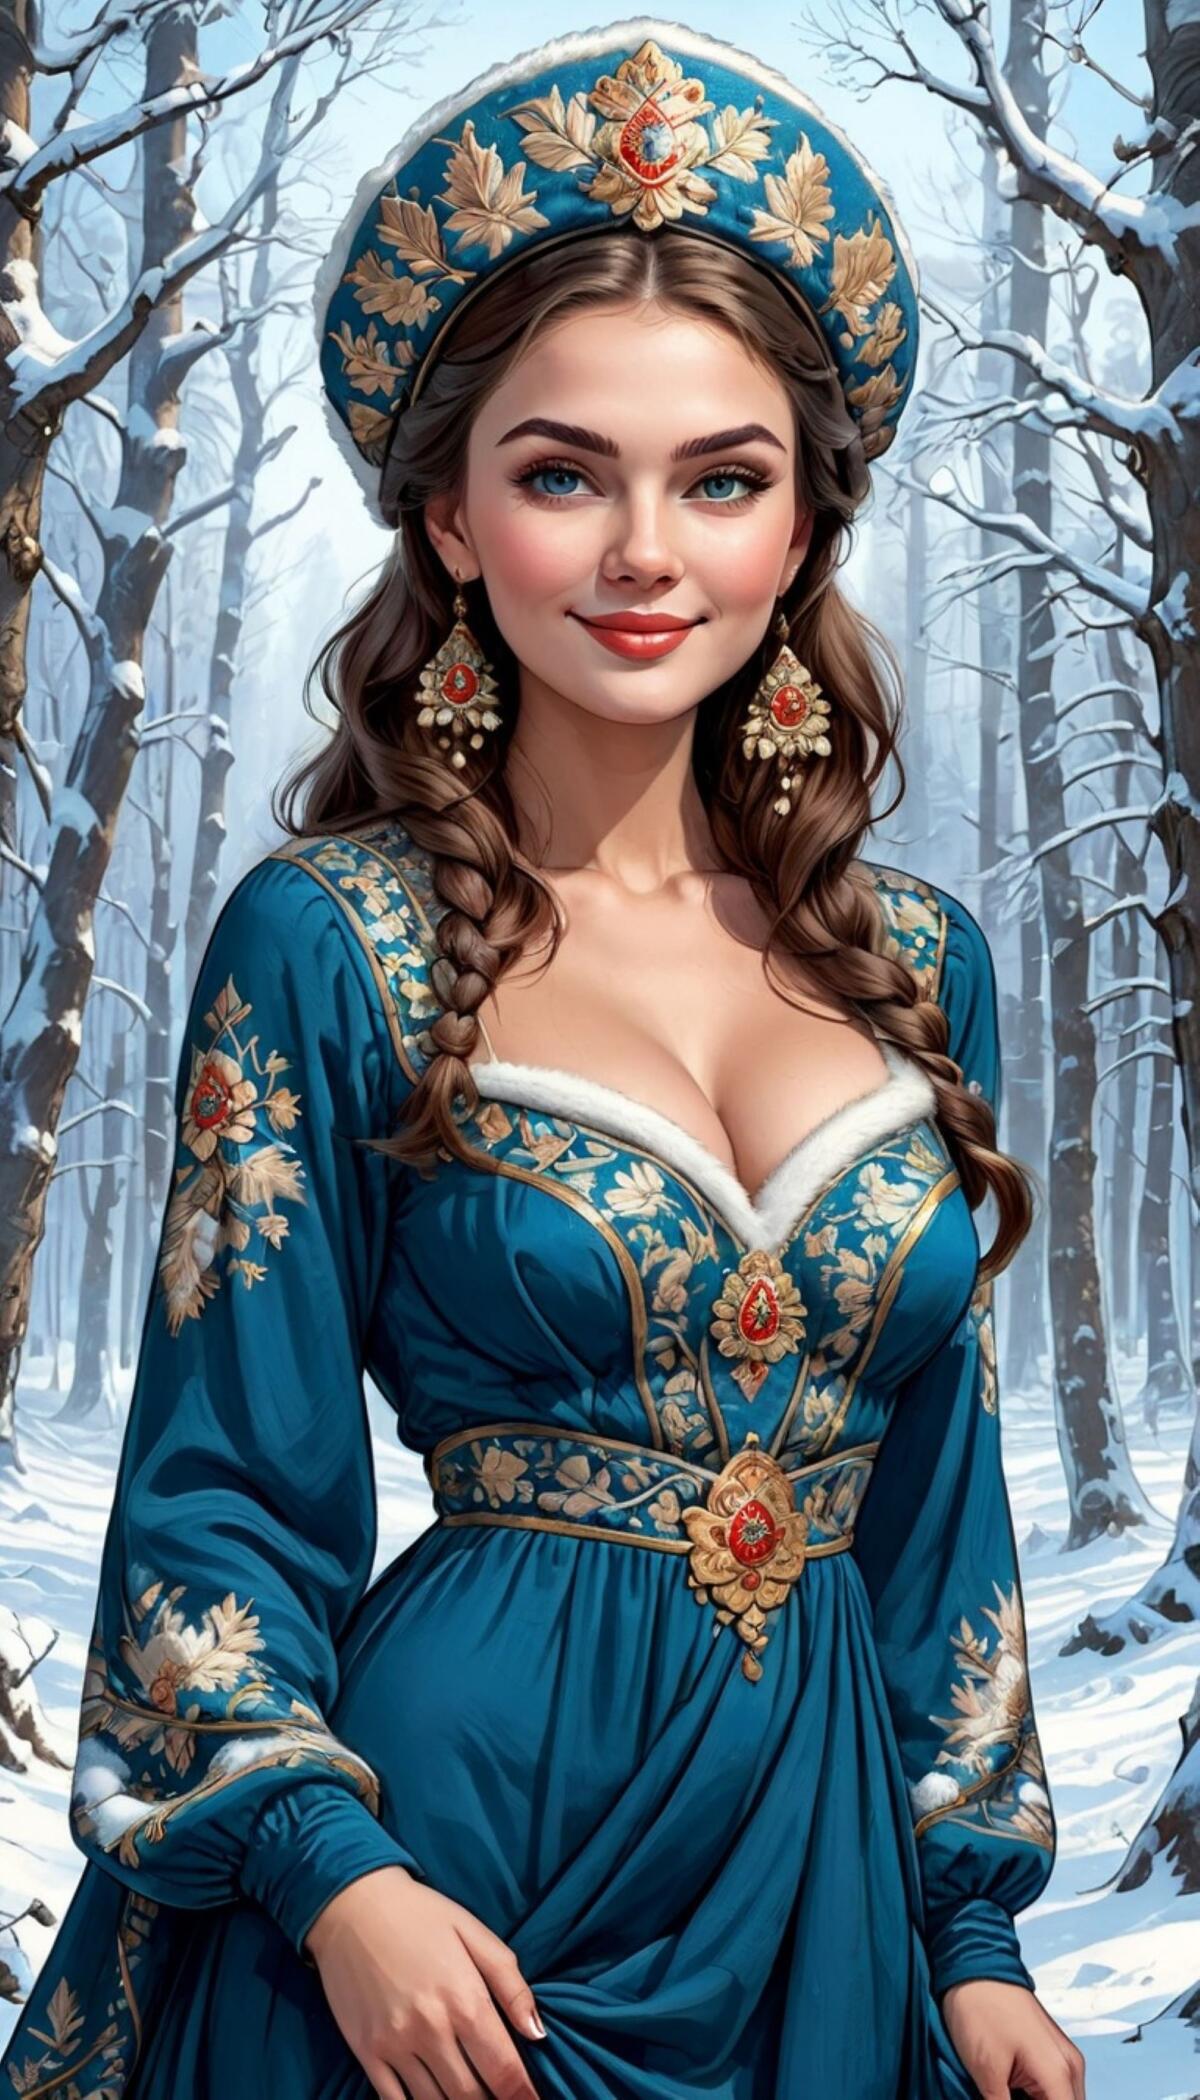 Russian beauty in the winter forest